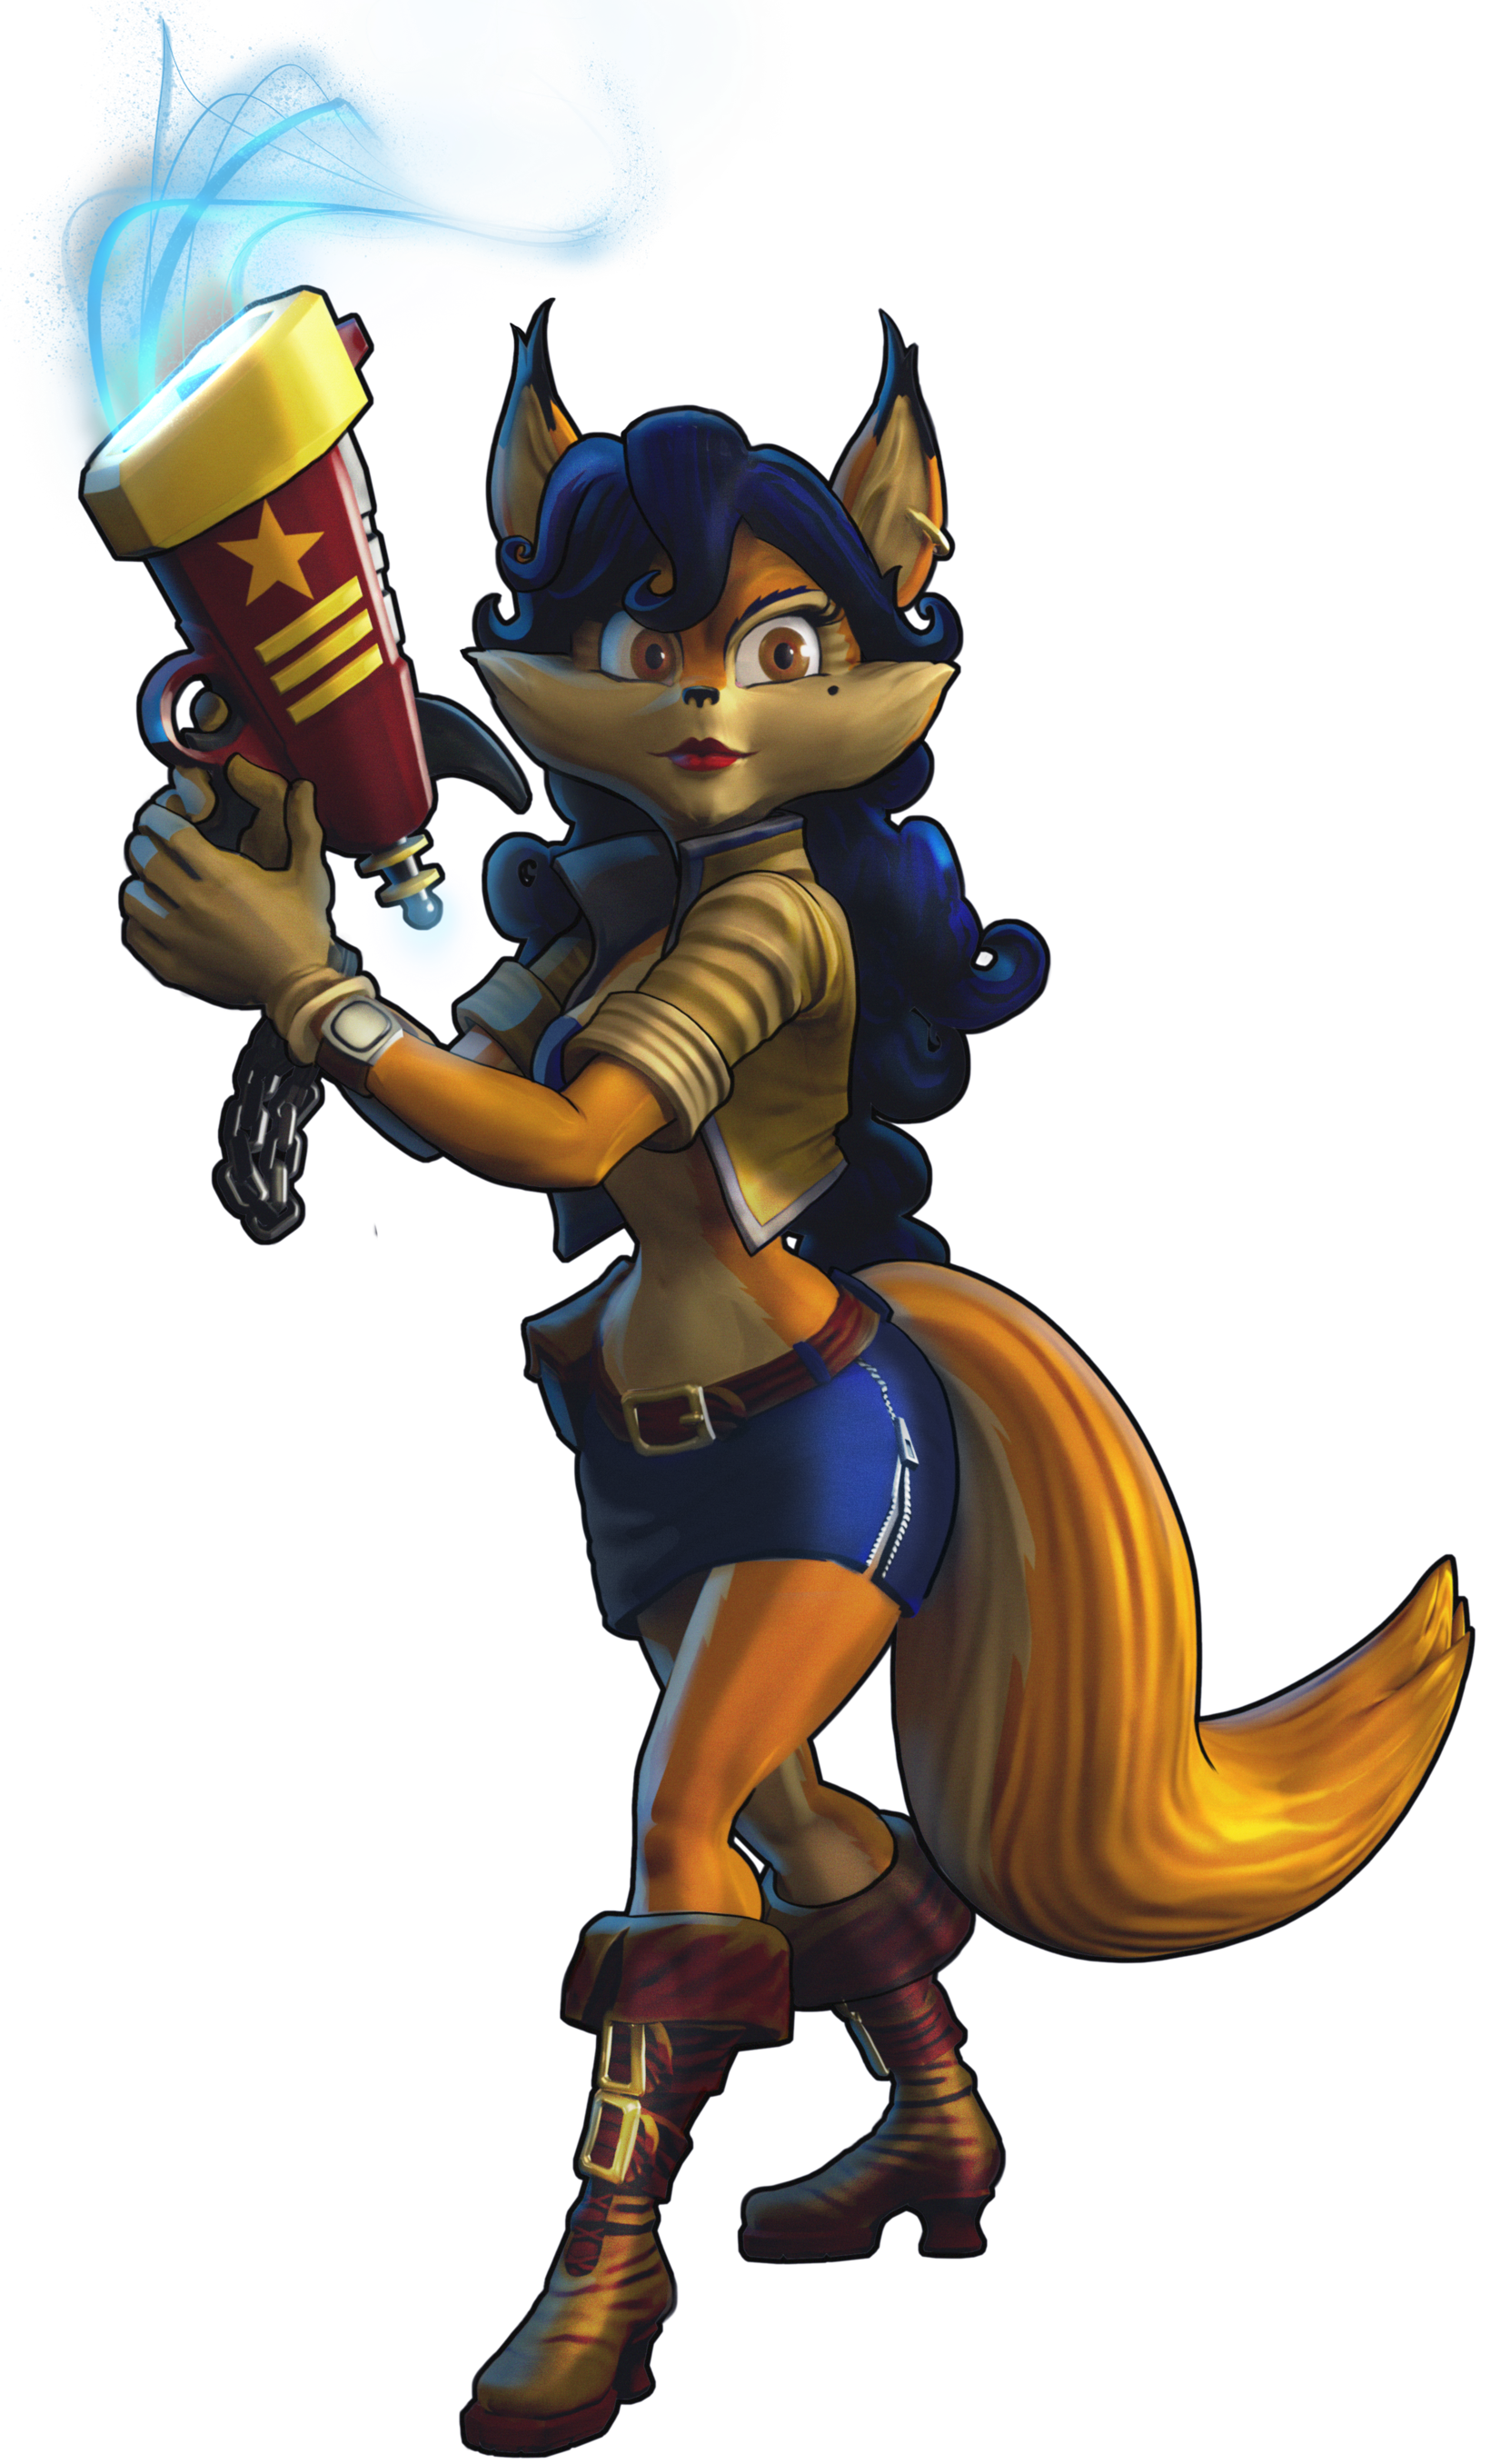 Sly 3: Honor Among Thieves - Wikipedia